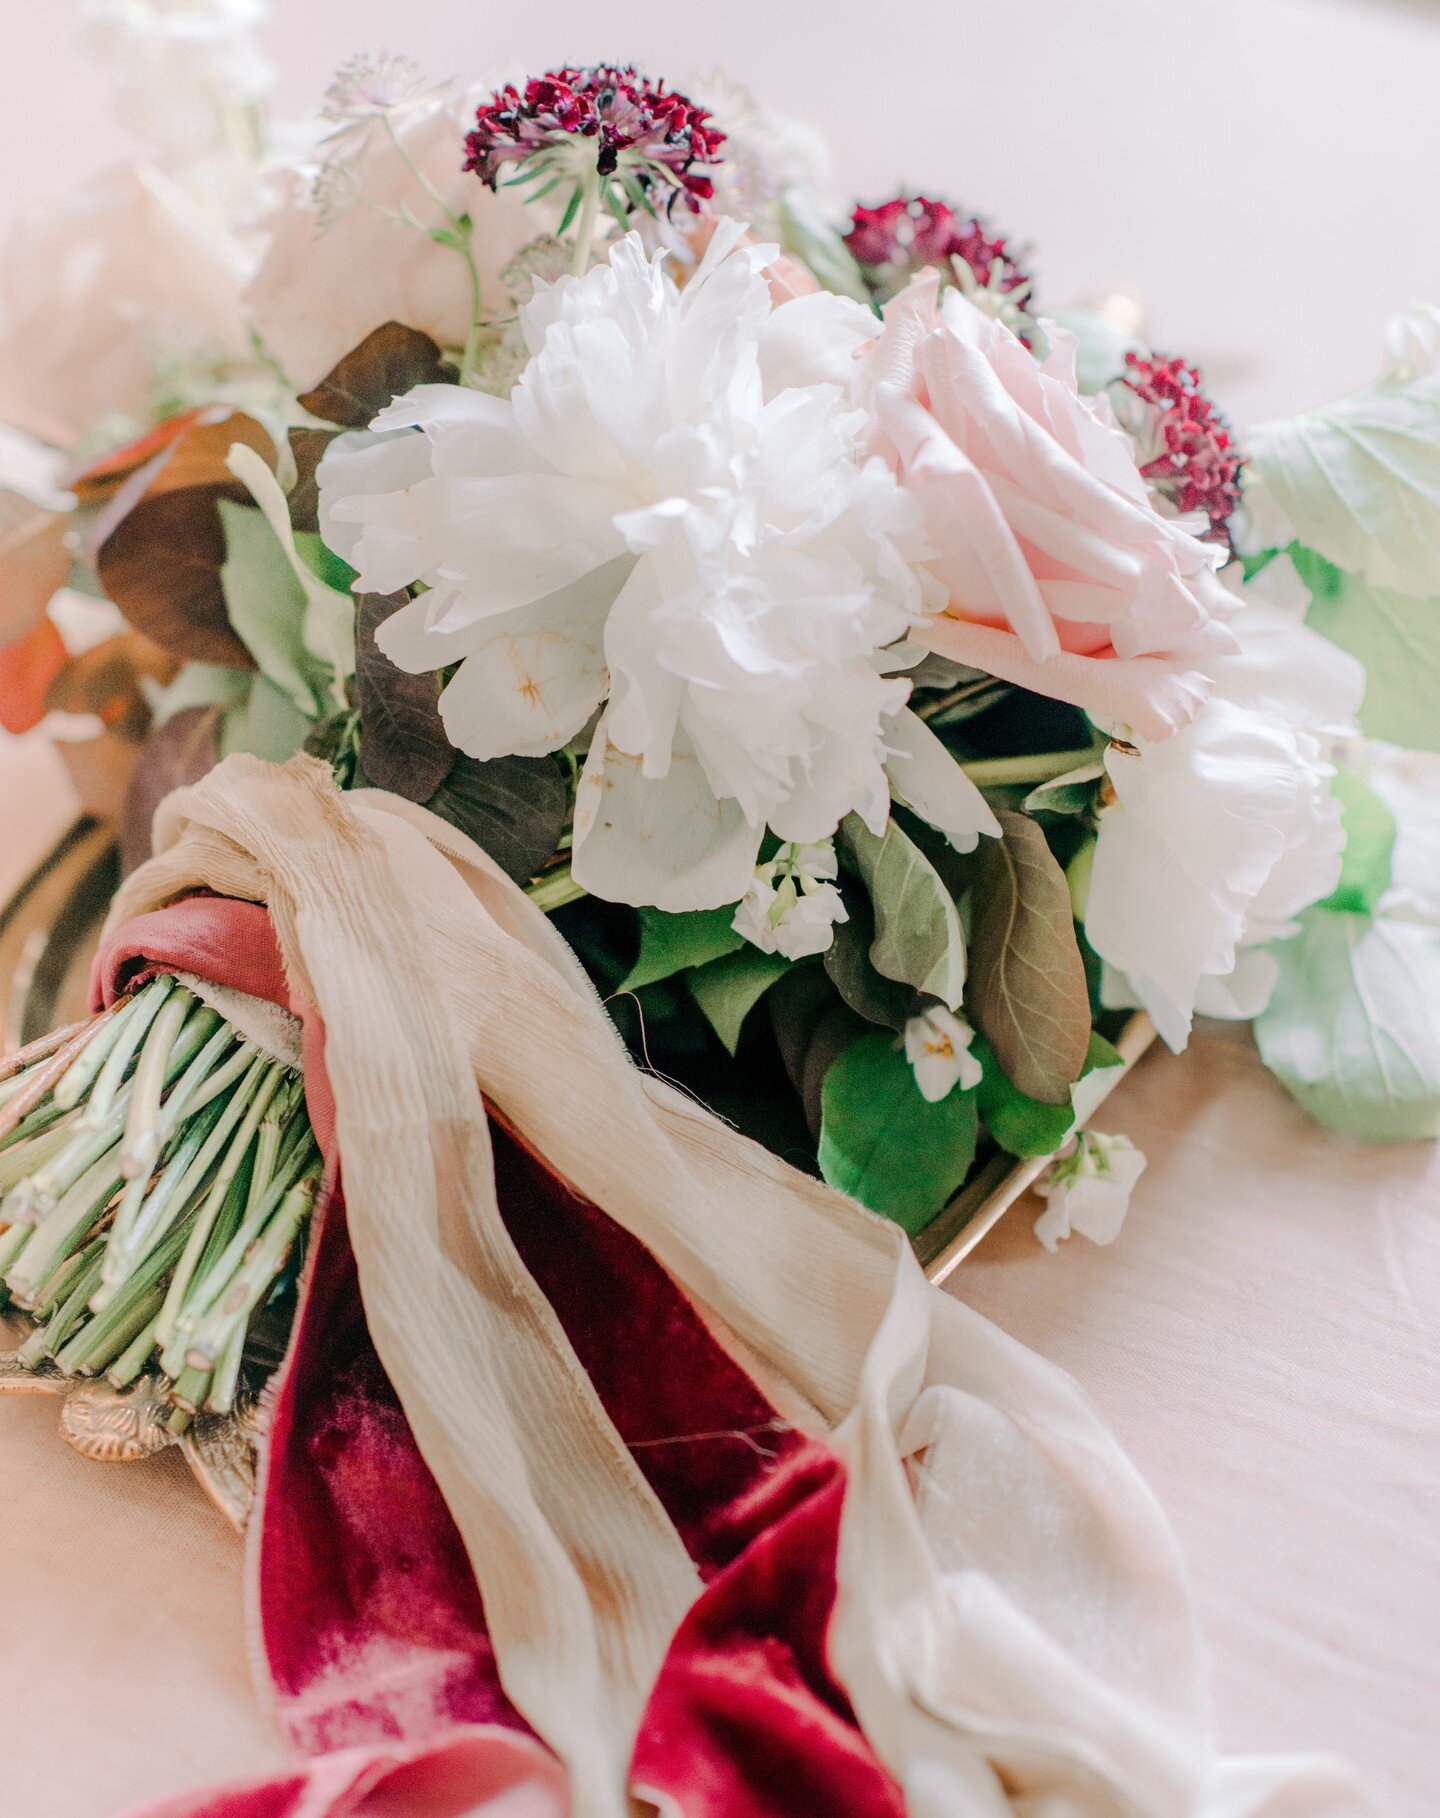 Stunning bouquet with the trailing ribbon - of silks,and pure cottons and linen

#chicboho #bohostyle #thatdress #fineartphotography #norfolkphotographer #norfolkweddingphotographer #cambridgeshireweddingphotographer #lincolnshireweddingphotographer 